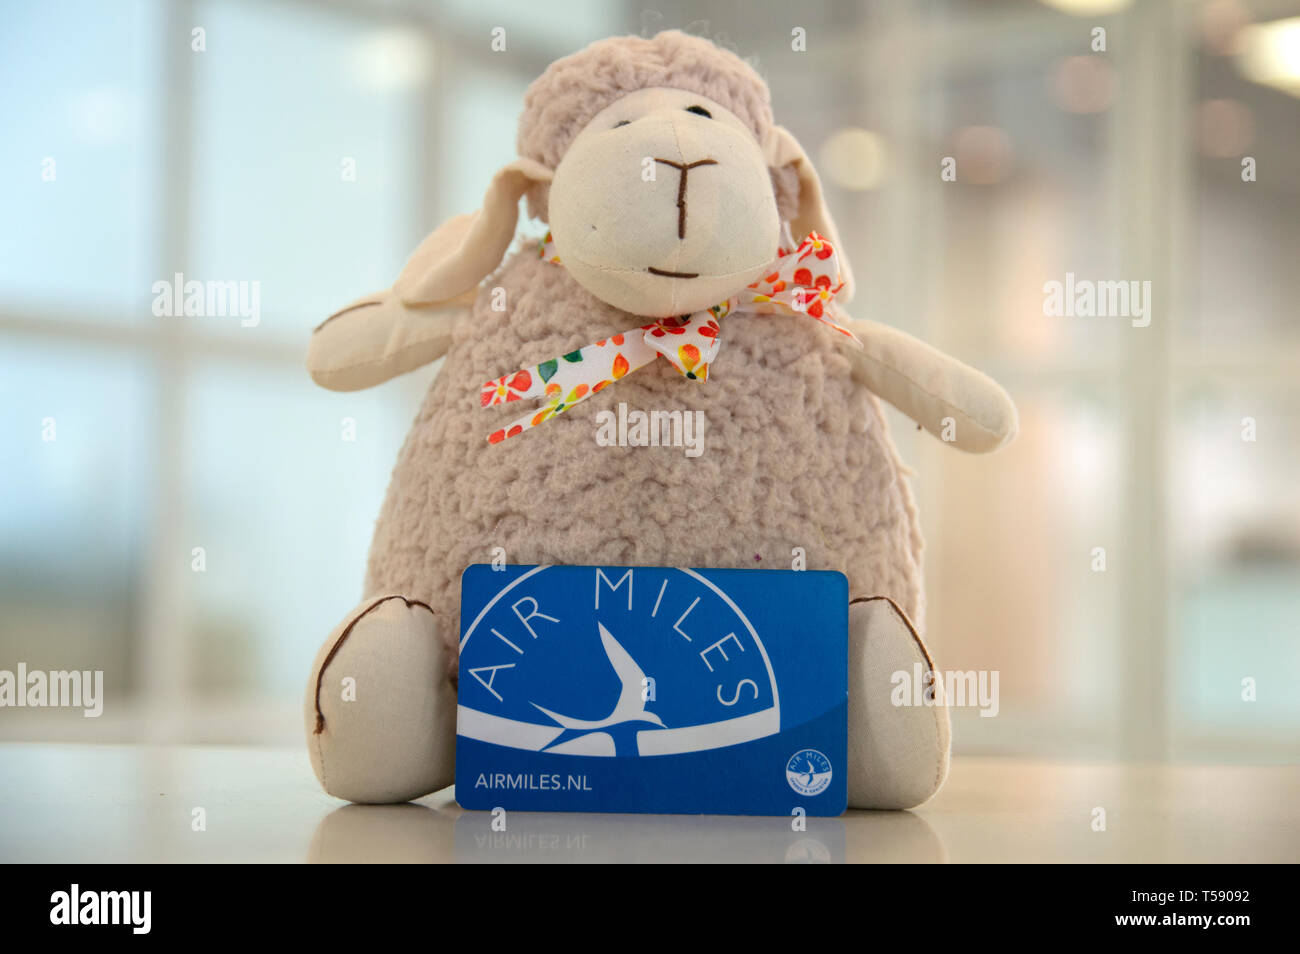 Sheep Puppet Promoting Airmiles Card At Amsterdam The Netherlands 2019 Stock Photo